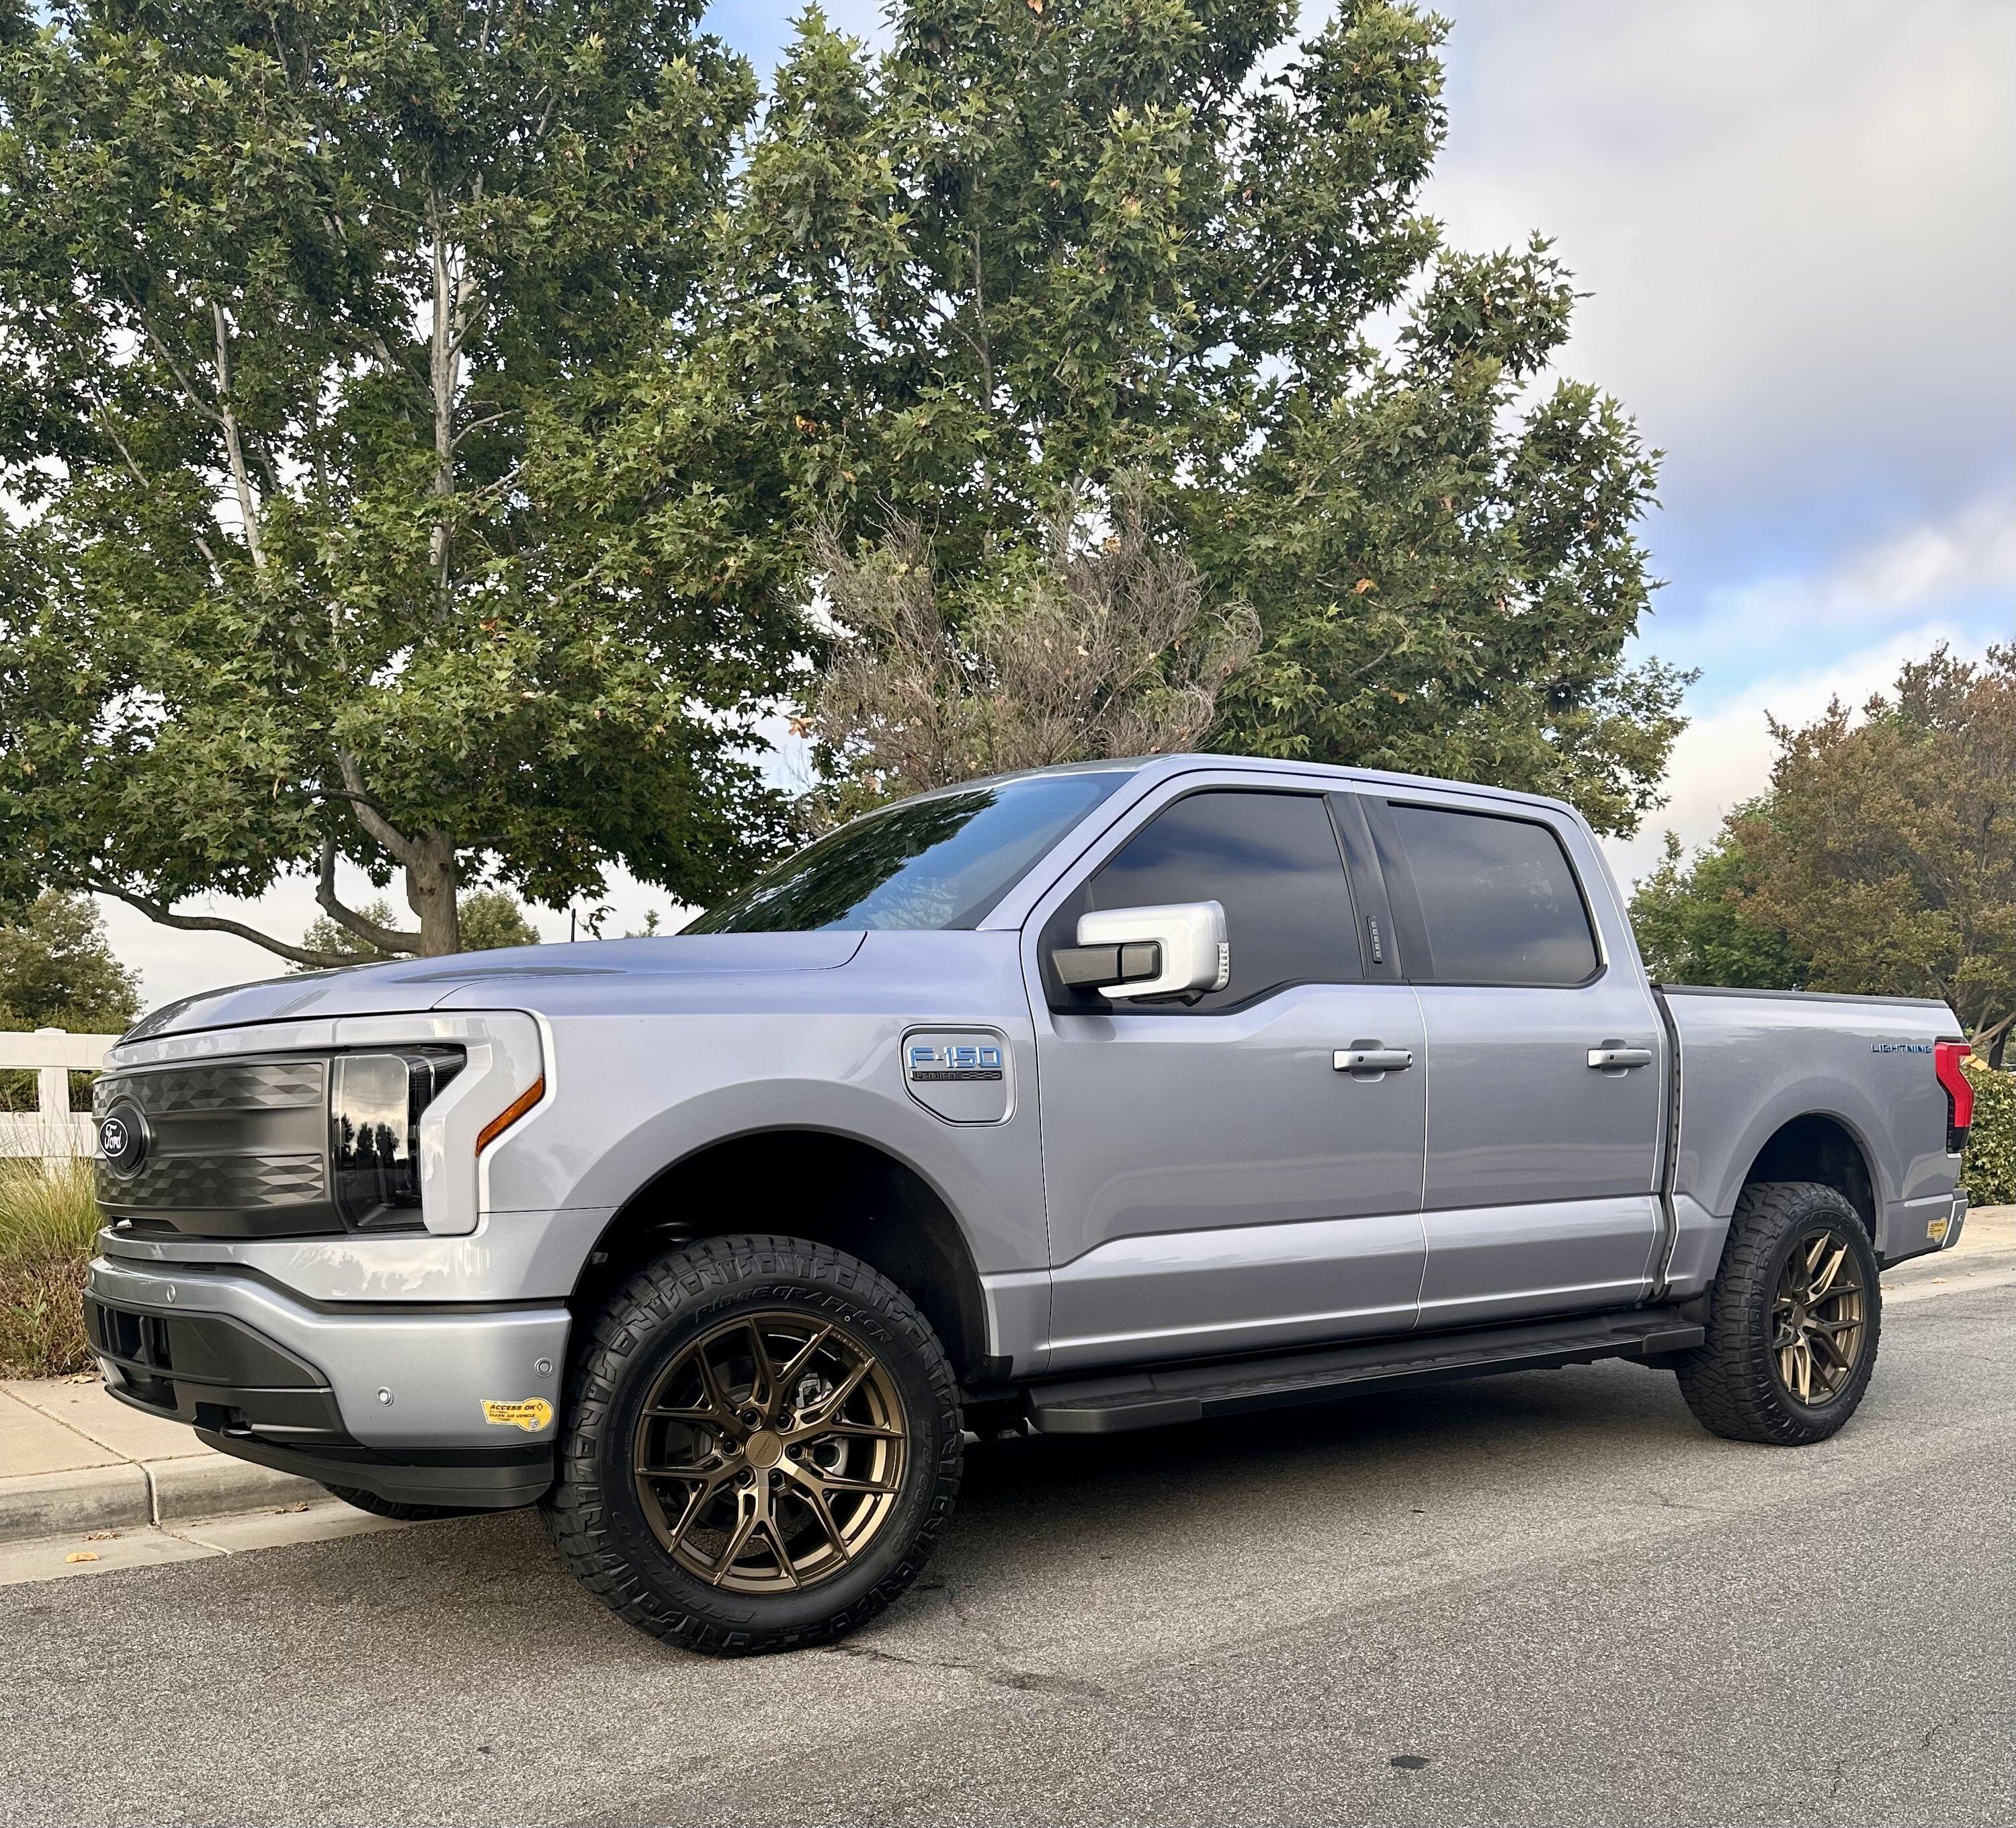 Ford F-150 Lightning Eibach R&D for Lightning lowering kit, leveling kit and lift kit -- submit your input IMG_2376